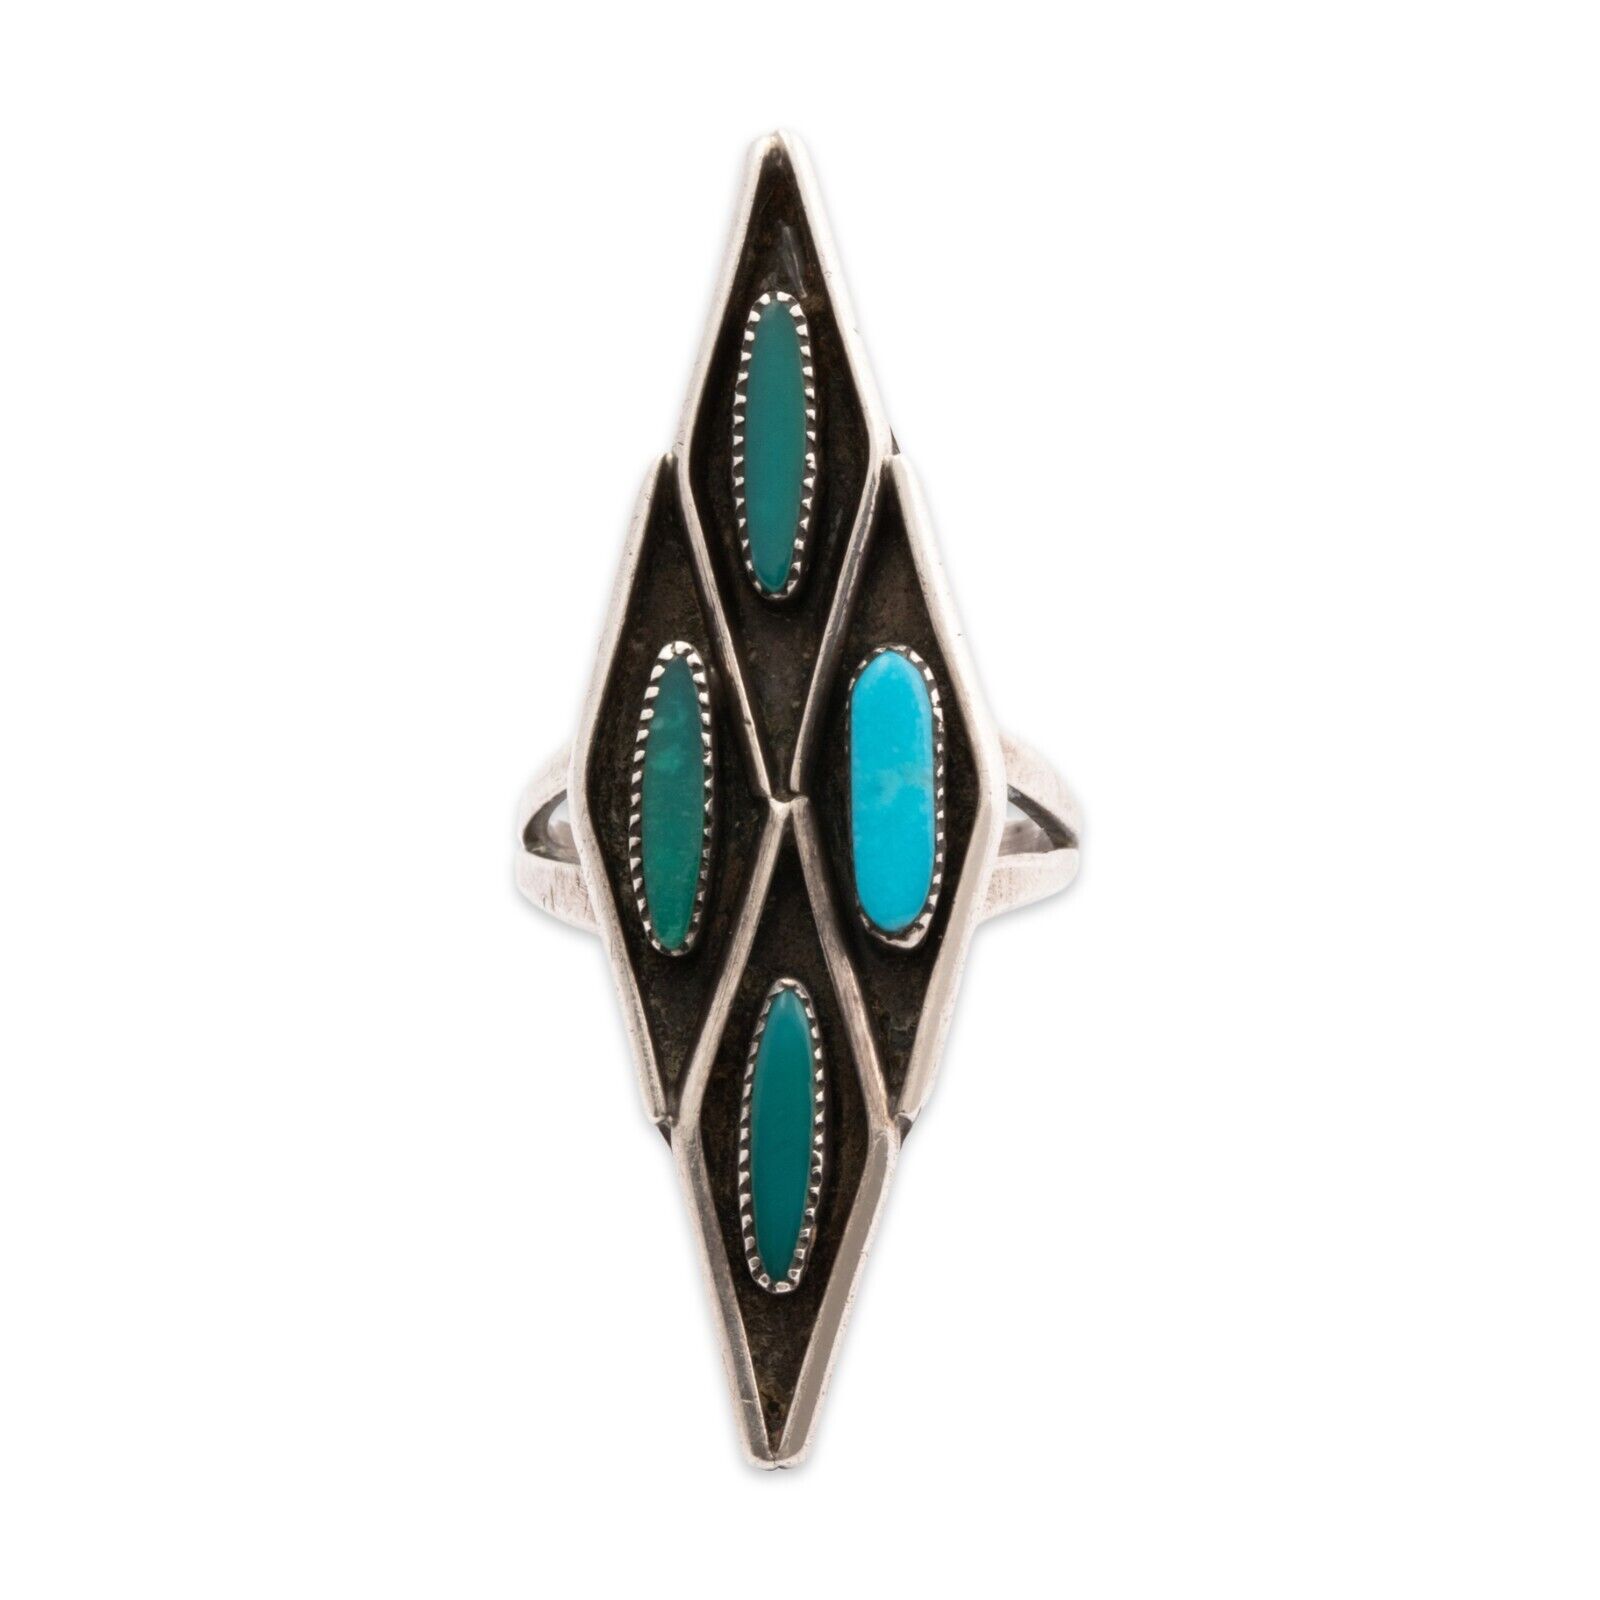 NATIVE AMERICAN ZUNI STERLING SILVER TURQUOISE PETIT POINT RING 4.25